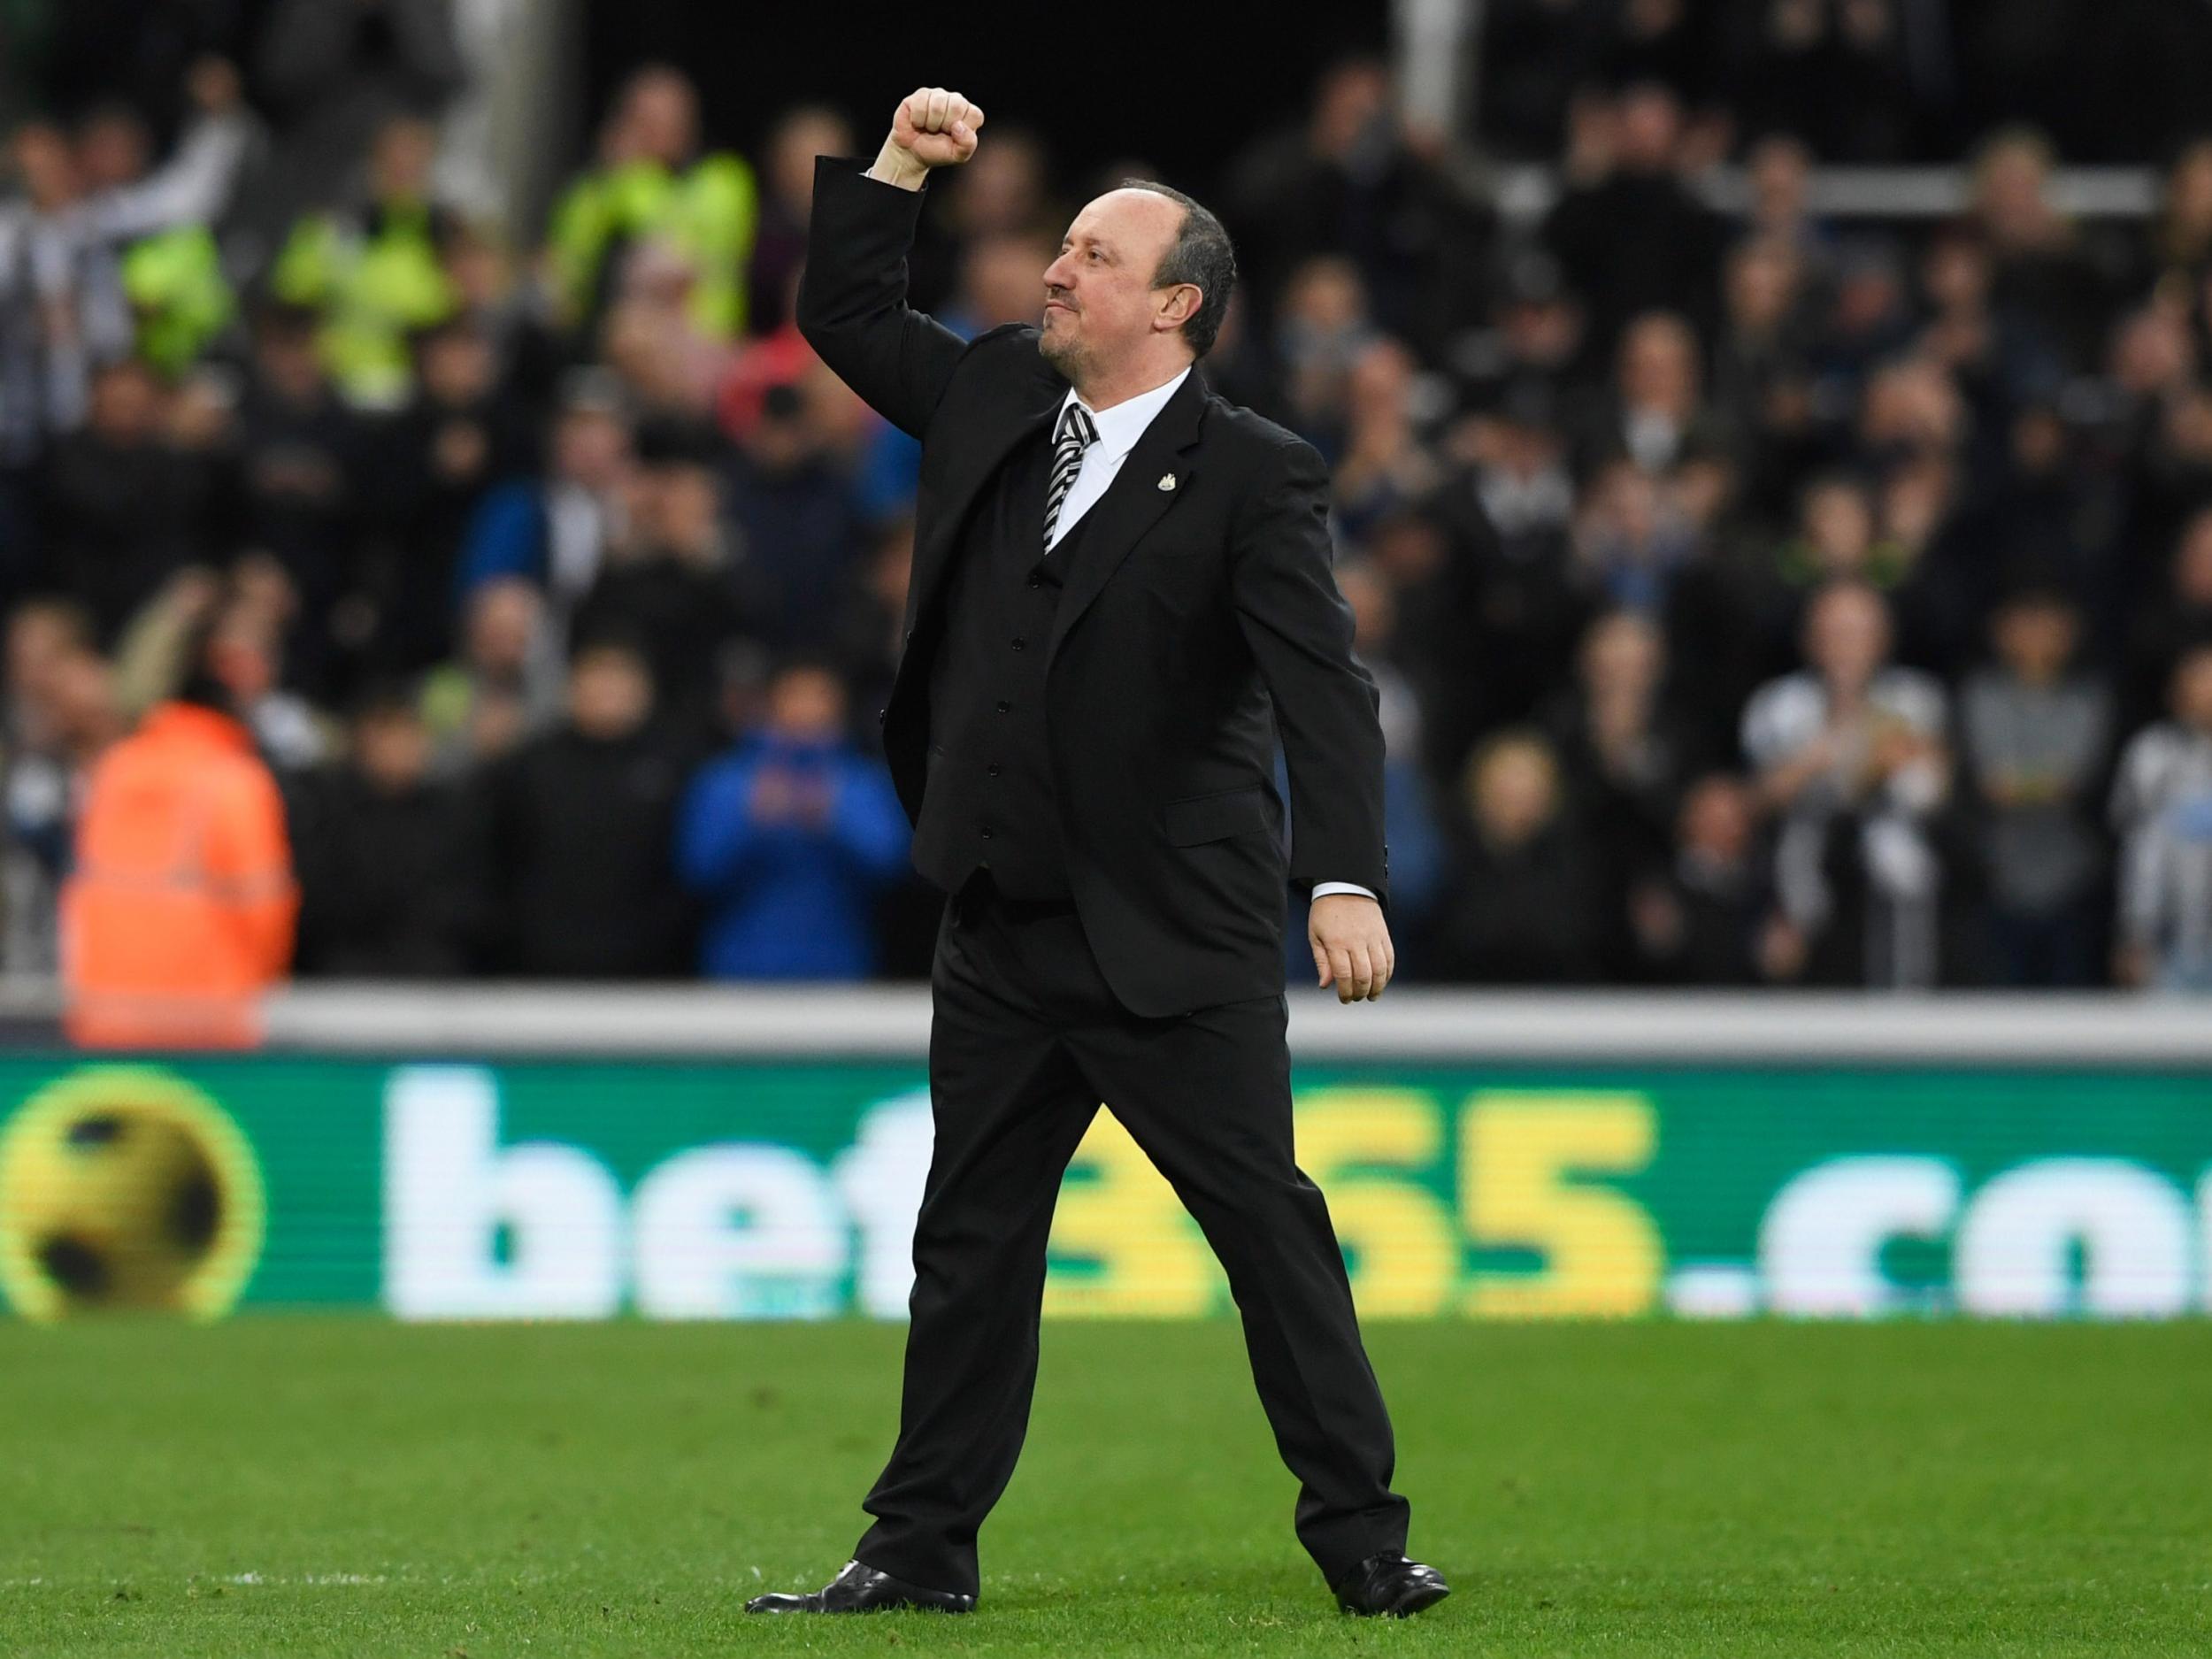 Benitez said his decision to stay on for this season was vindicated